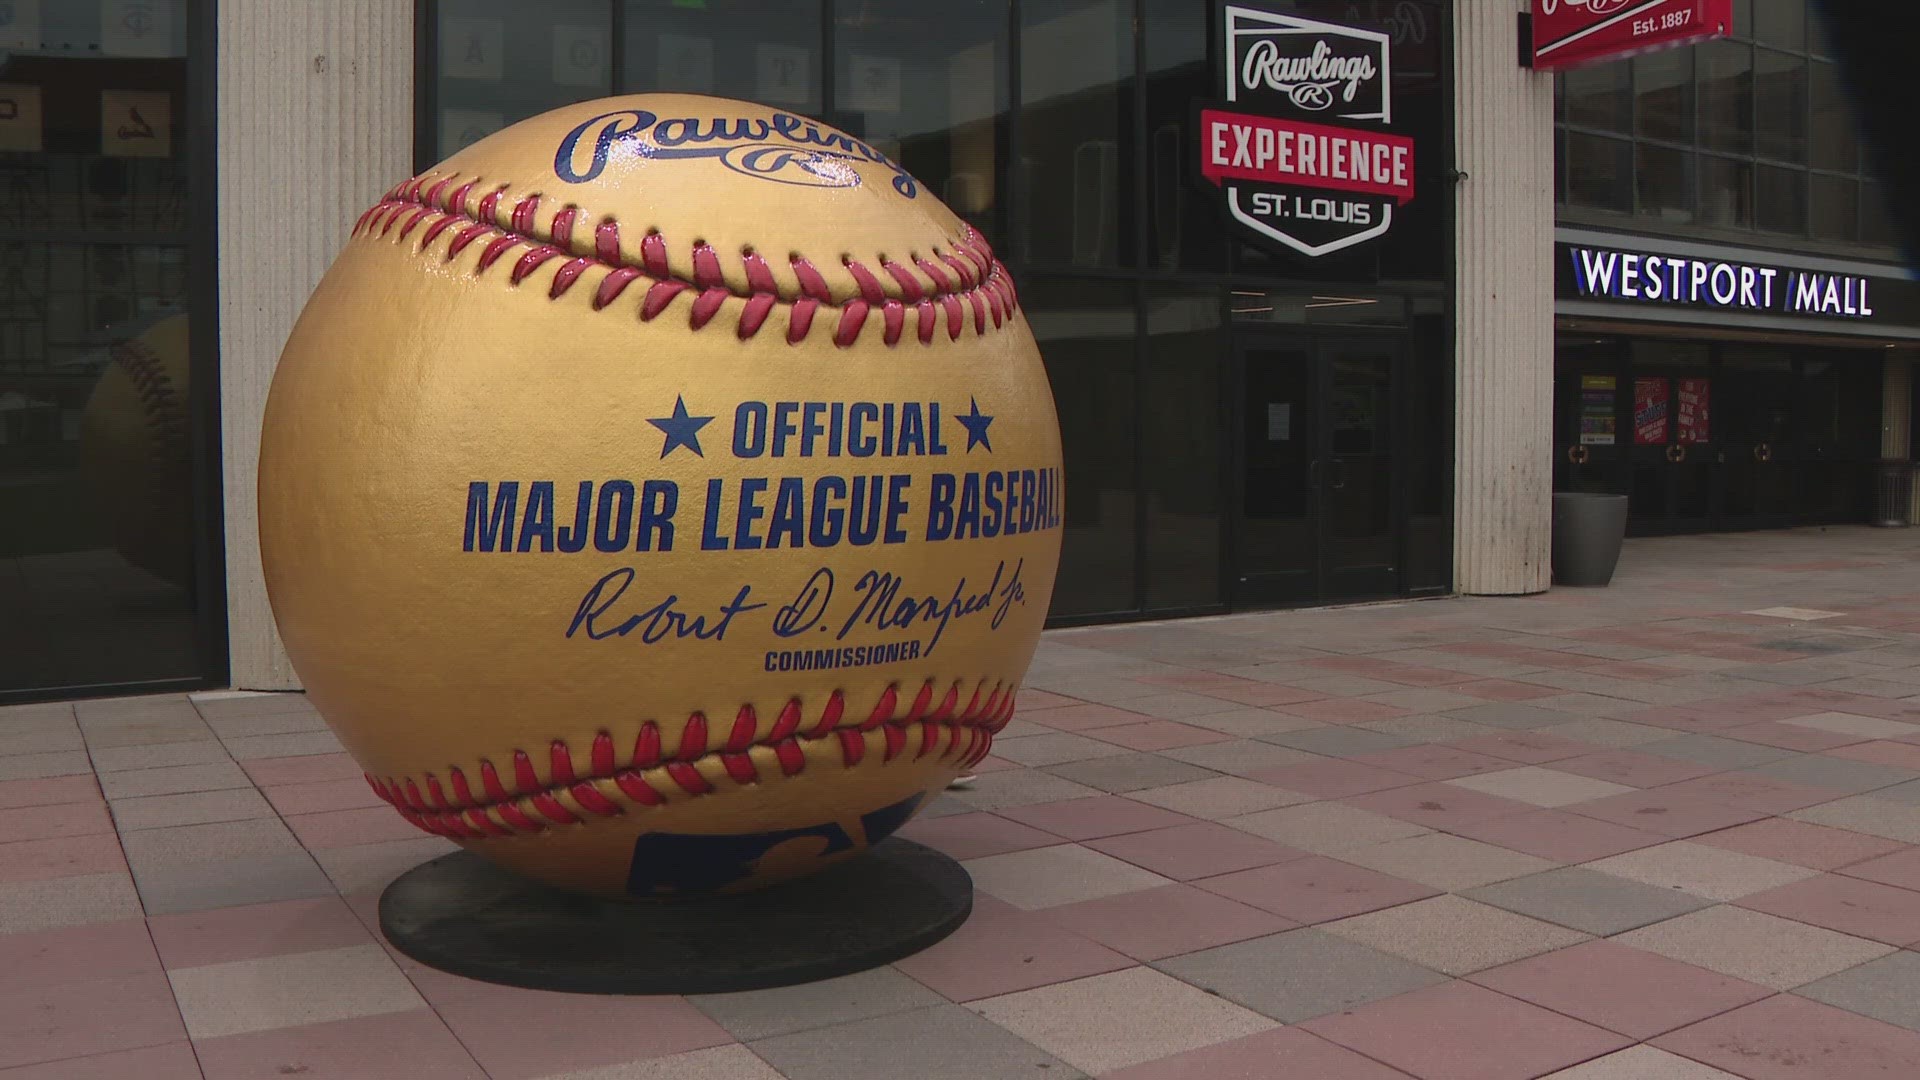 The Rawlings Experience opens Friday in Maryland Heights. Baseball fans can take a look back at baseball history and use new technology with a batting simulator.